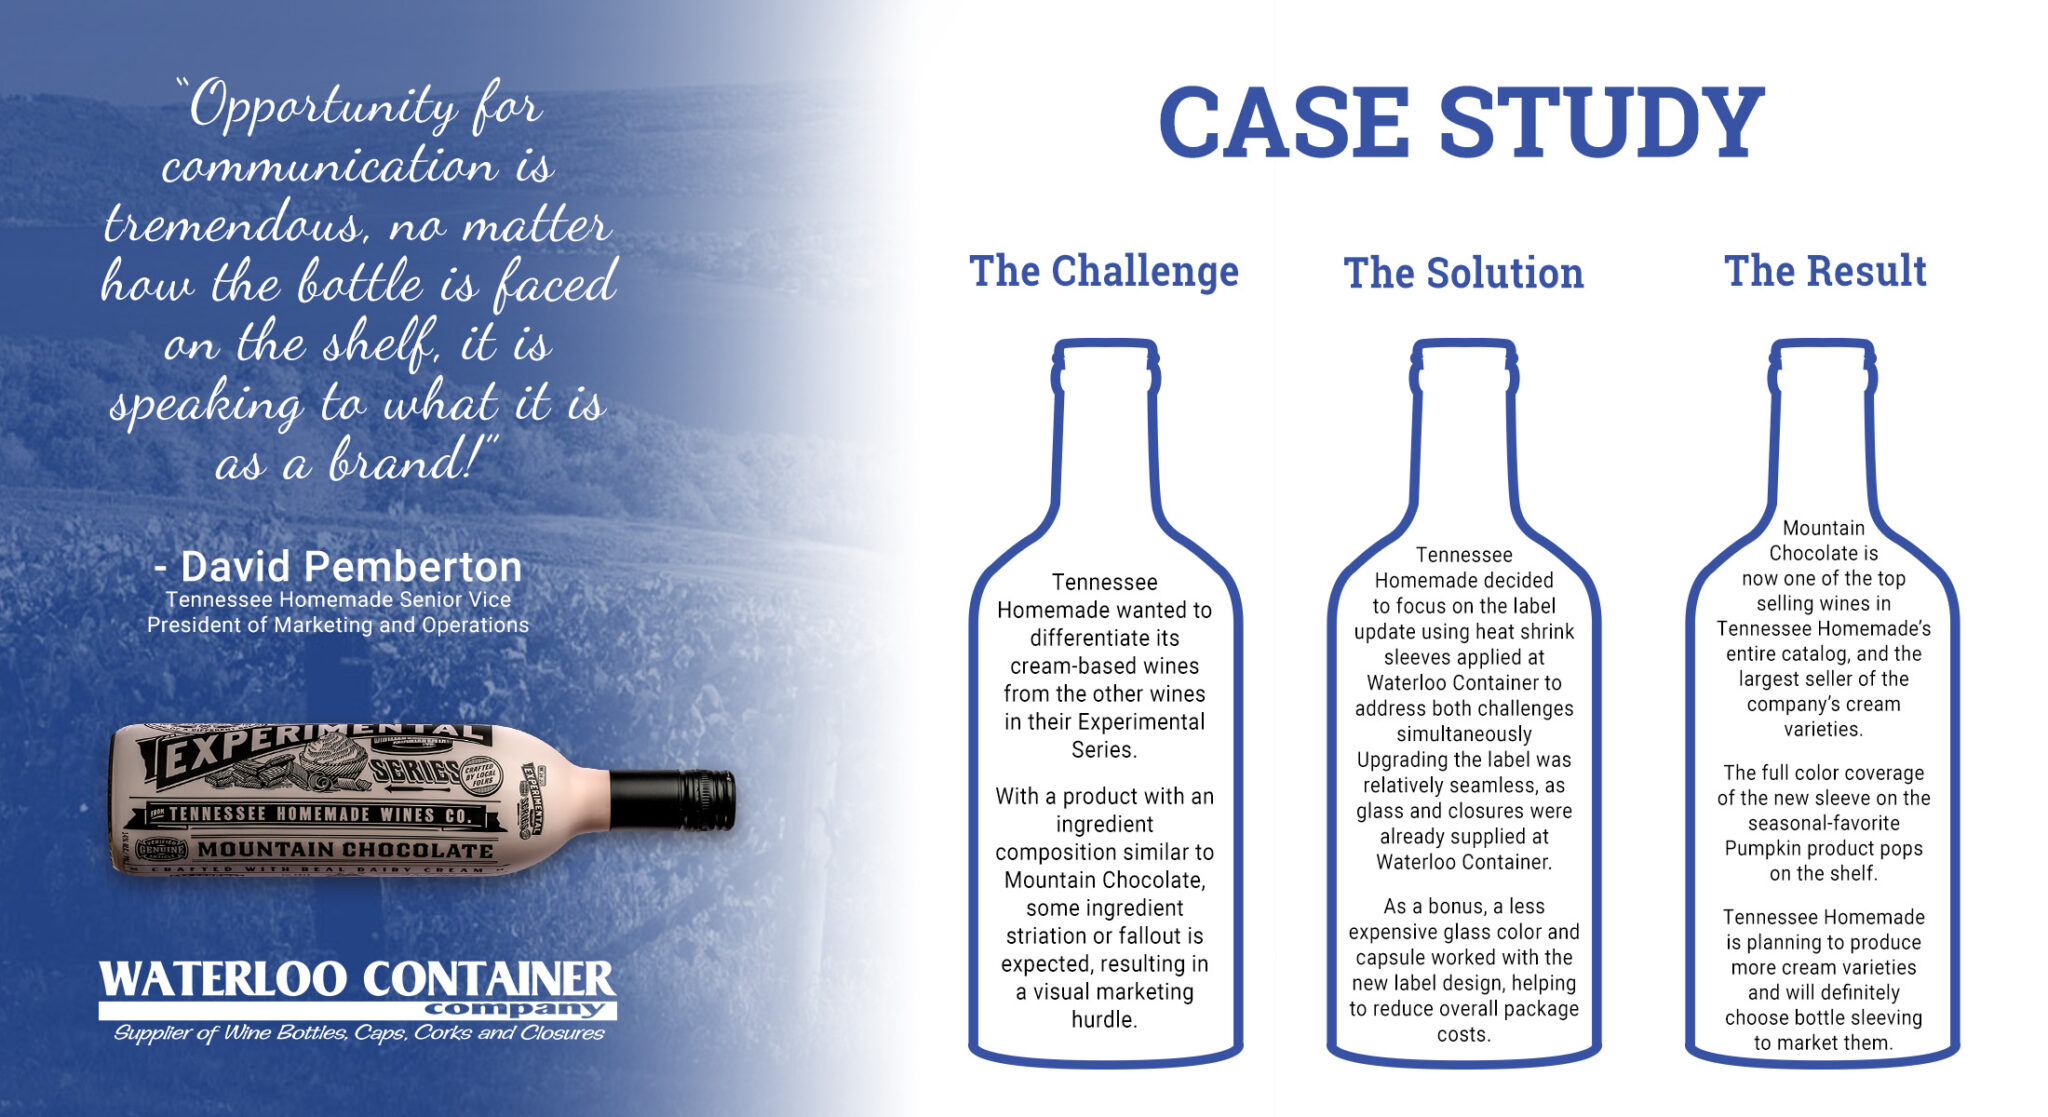 The Challenge: Tennessee Homemade wanted to differentiate its cream-based wines from other wines in their Experimental Series. With a product with an ingredient composition similar to Mountain Chocolate, some ingredient striation or fallout is expected, resulting in a visual marketing hurdle.

The Solution: Tennessee Homemade decided to focus on the label update using heat shrink sleeves applied at Waterloo Container to address both challenges simultaneously. Upgrading the label was relatively seamless, as glass and closures were already supplied at Waterloo Container. As a bonus, a less expensive glass color and capsule worked with the new label design, helping to reduce overall package costs.

The Result: Mountain Chocolate is now one of the top selling wines in Tennessee Homemade's entire catalog, and the largest seller of the companies cream varieties. The full color coverage of the new sleeve on the seasonal-favorite Pumpkin product pops on the shelf. Tennessee Homemade is planning to produce more cream varieties and will definitely choose bottle sleeving to market them.